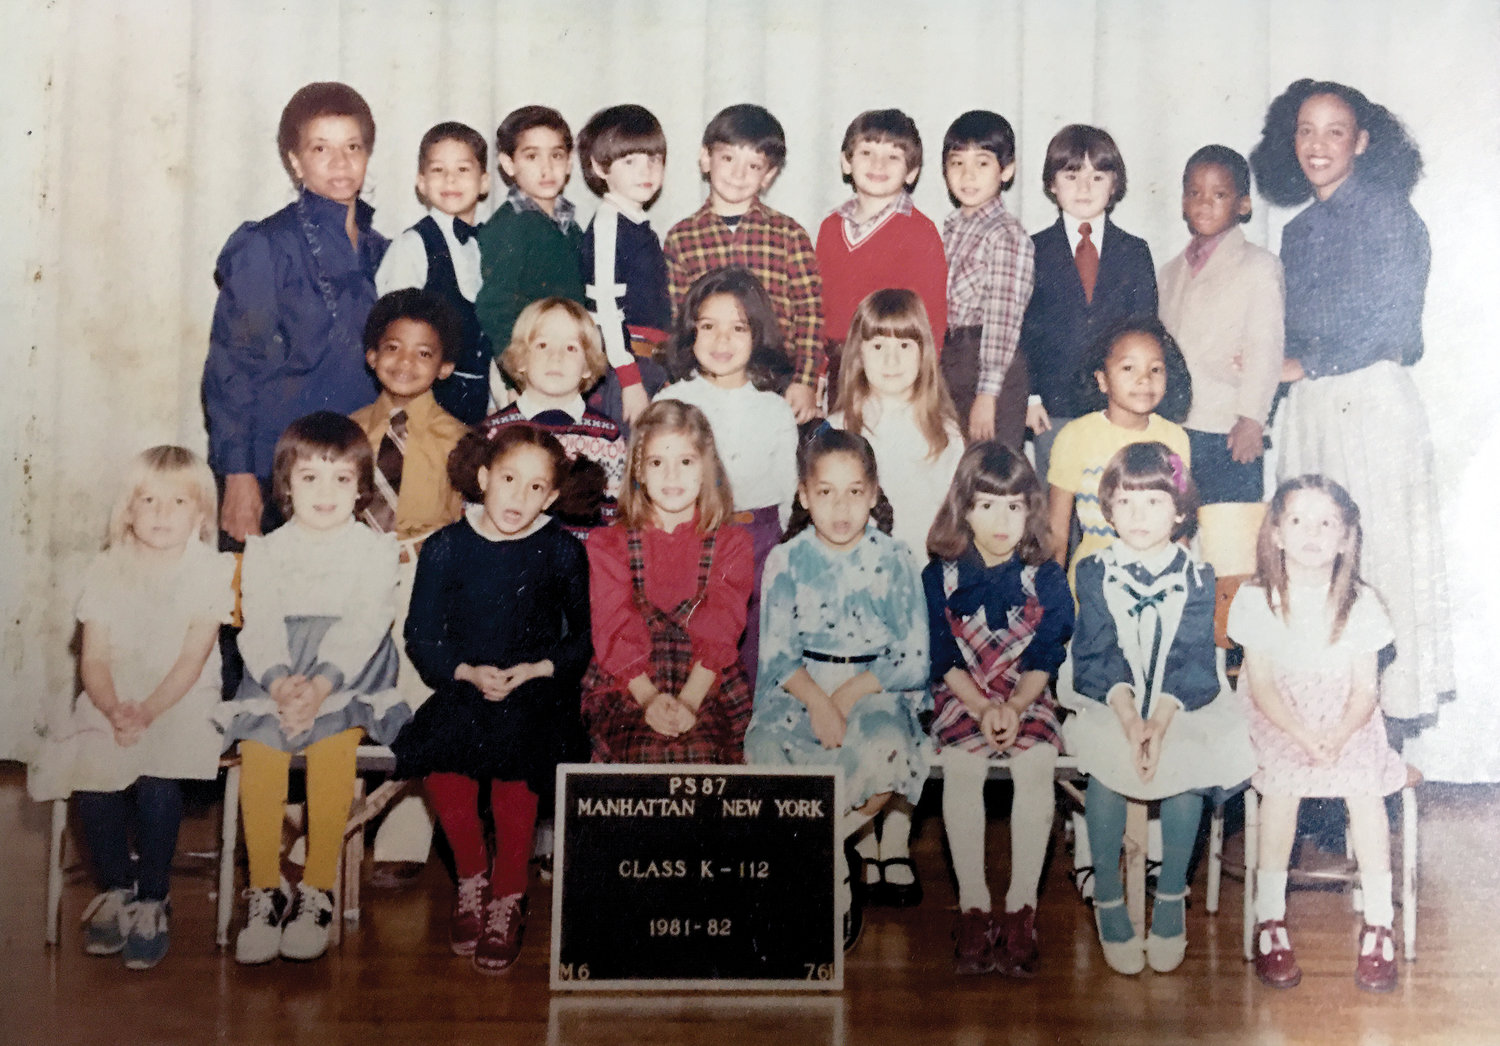 Near top left Joseph cuts a handsome figure with his kindergarten class at PS 87 in Manhattan.